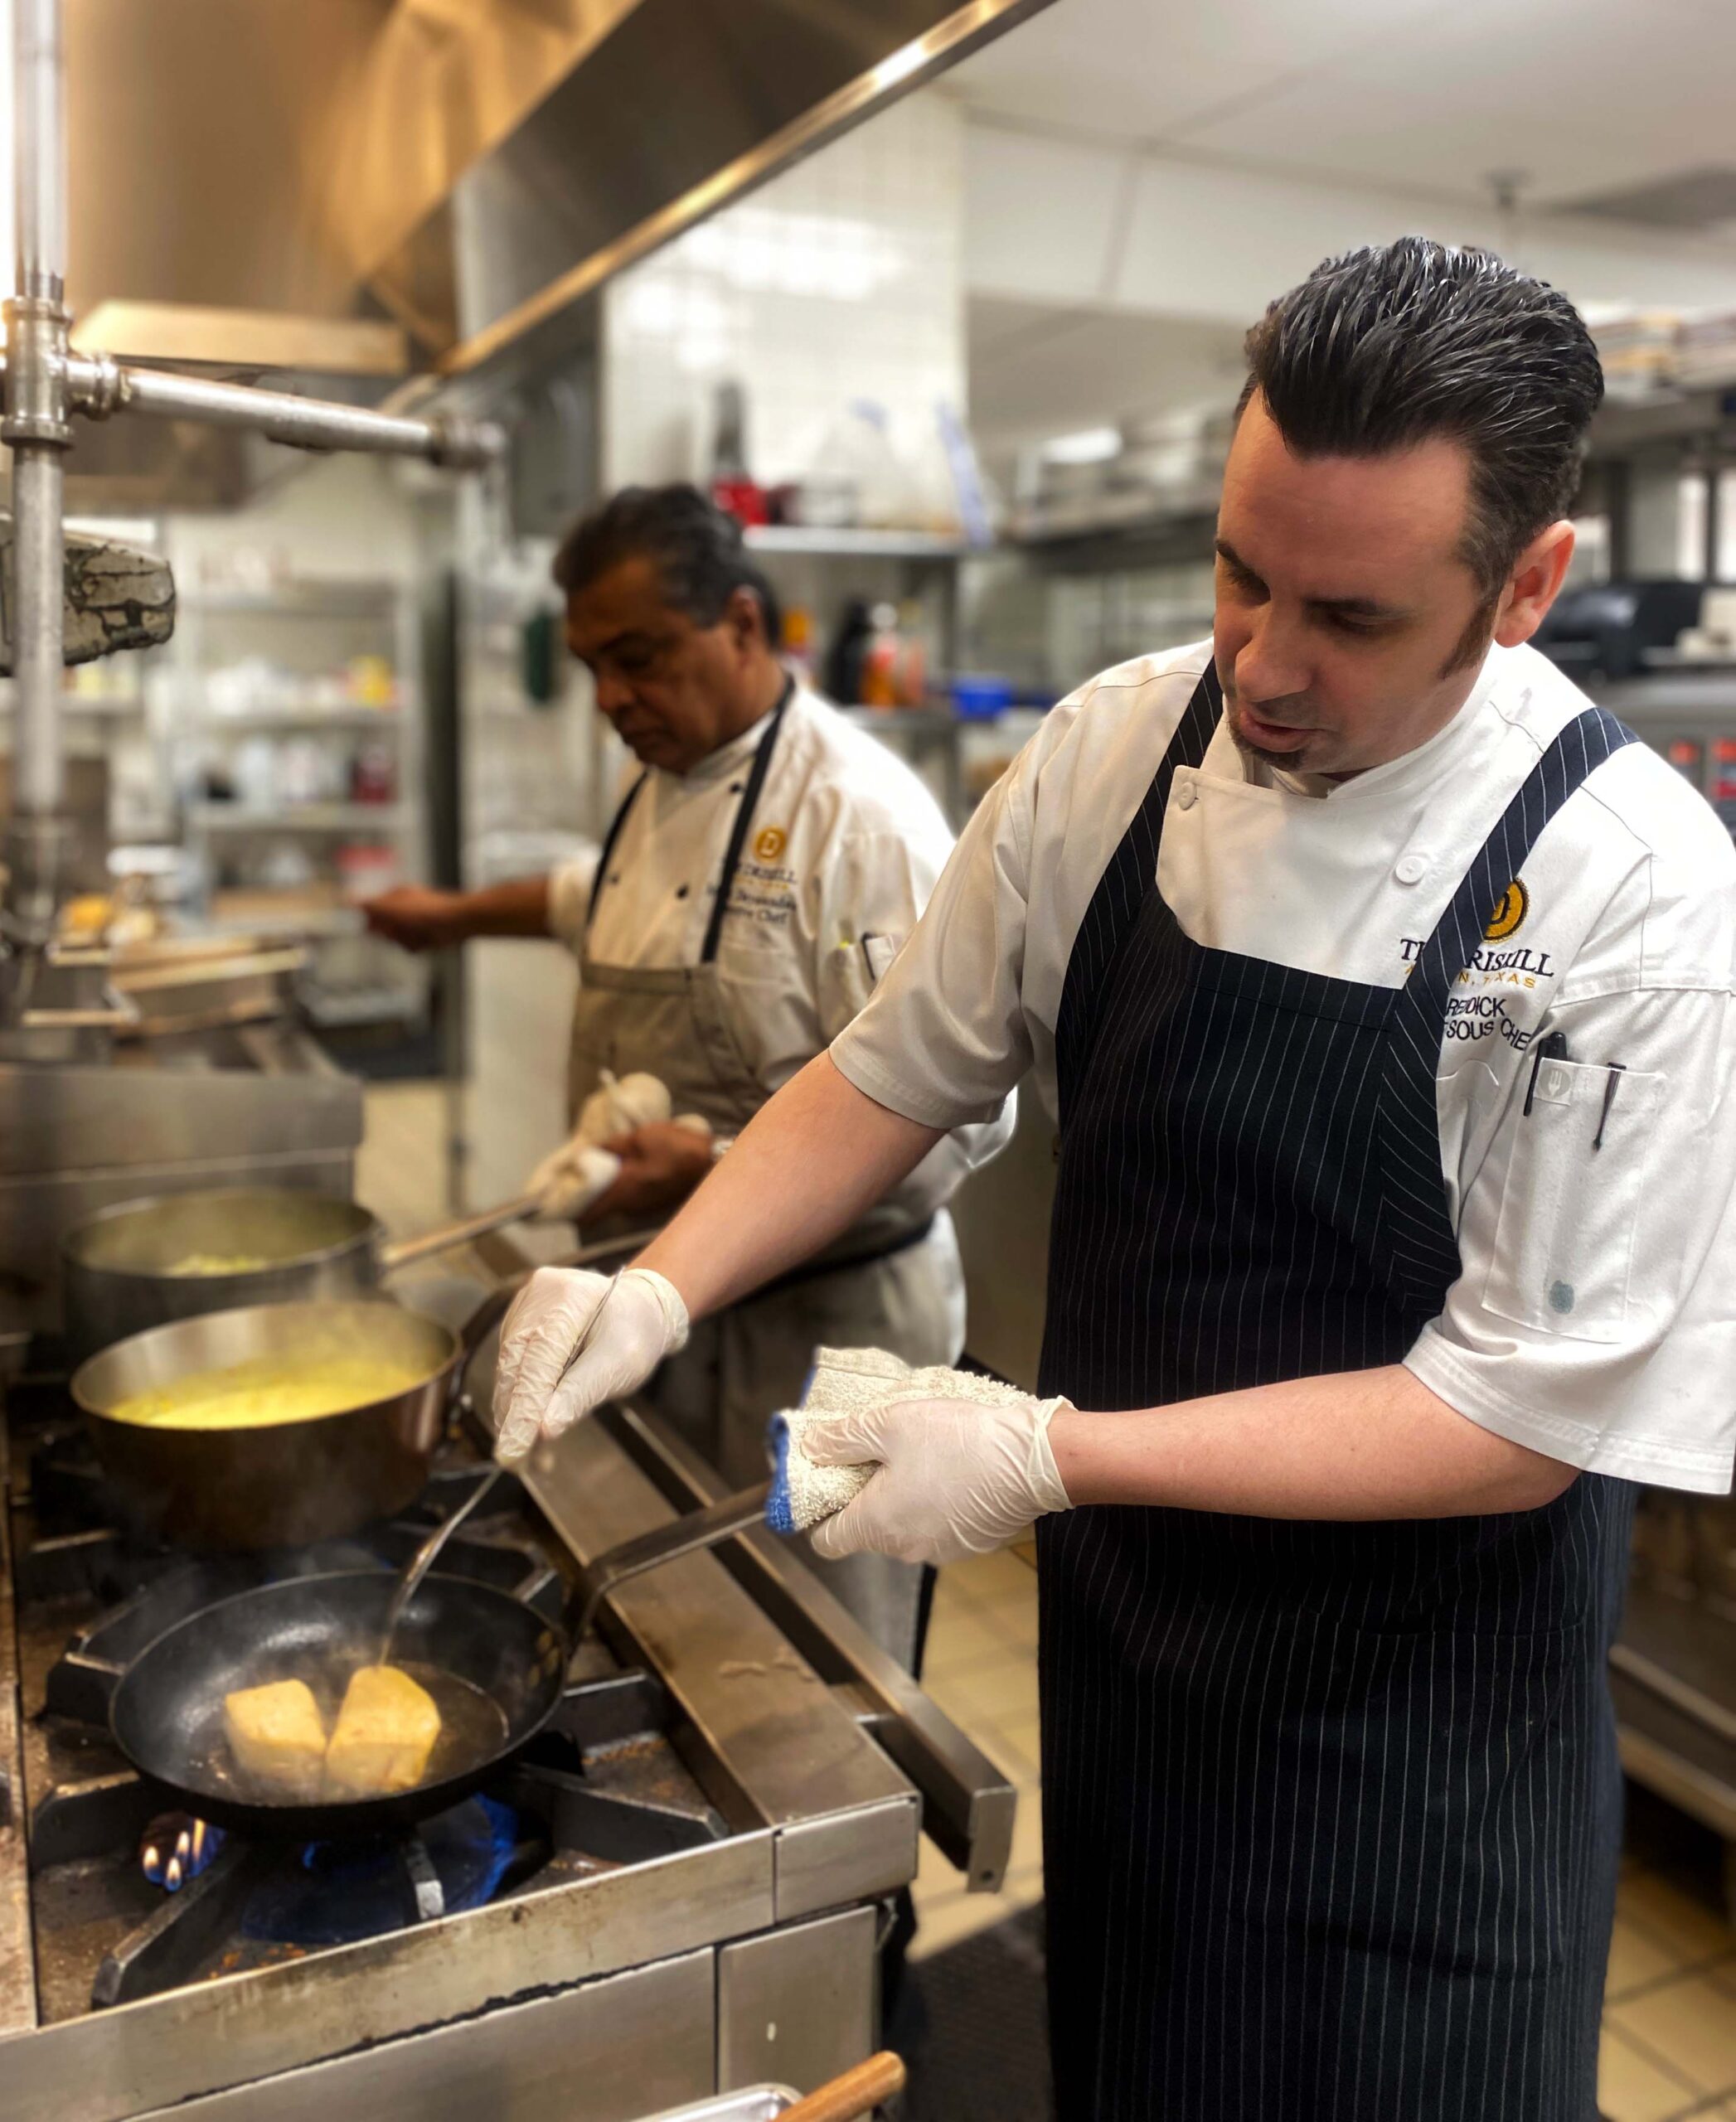 Chefs Mark and Iain cooking together in The Driskill kitchen